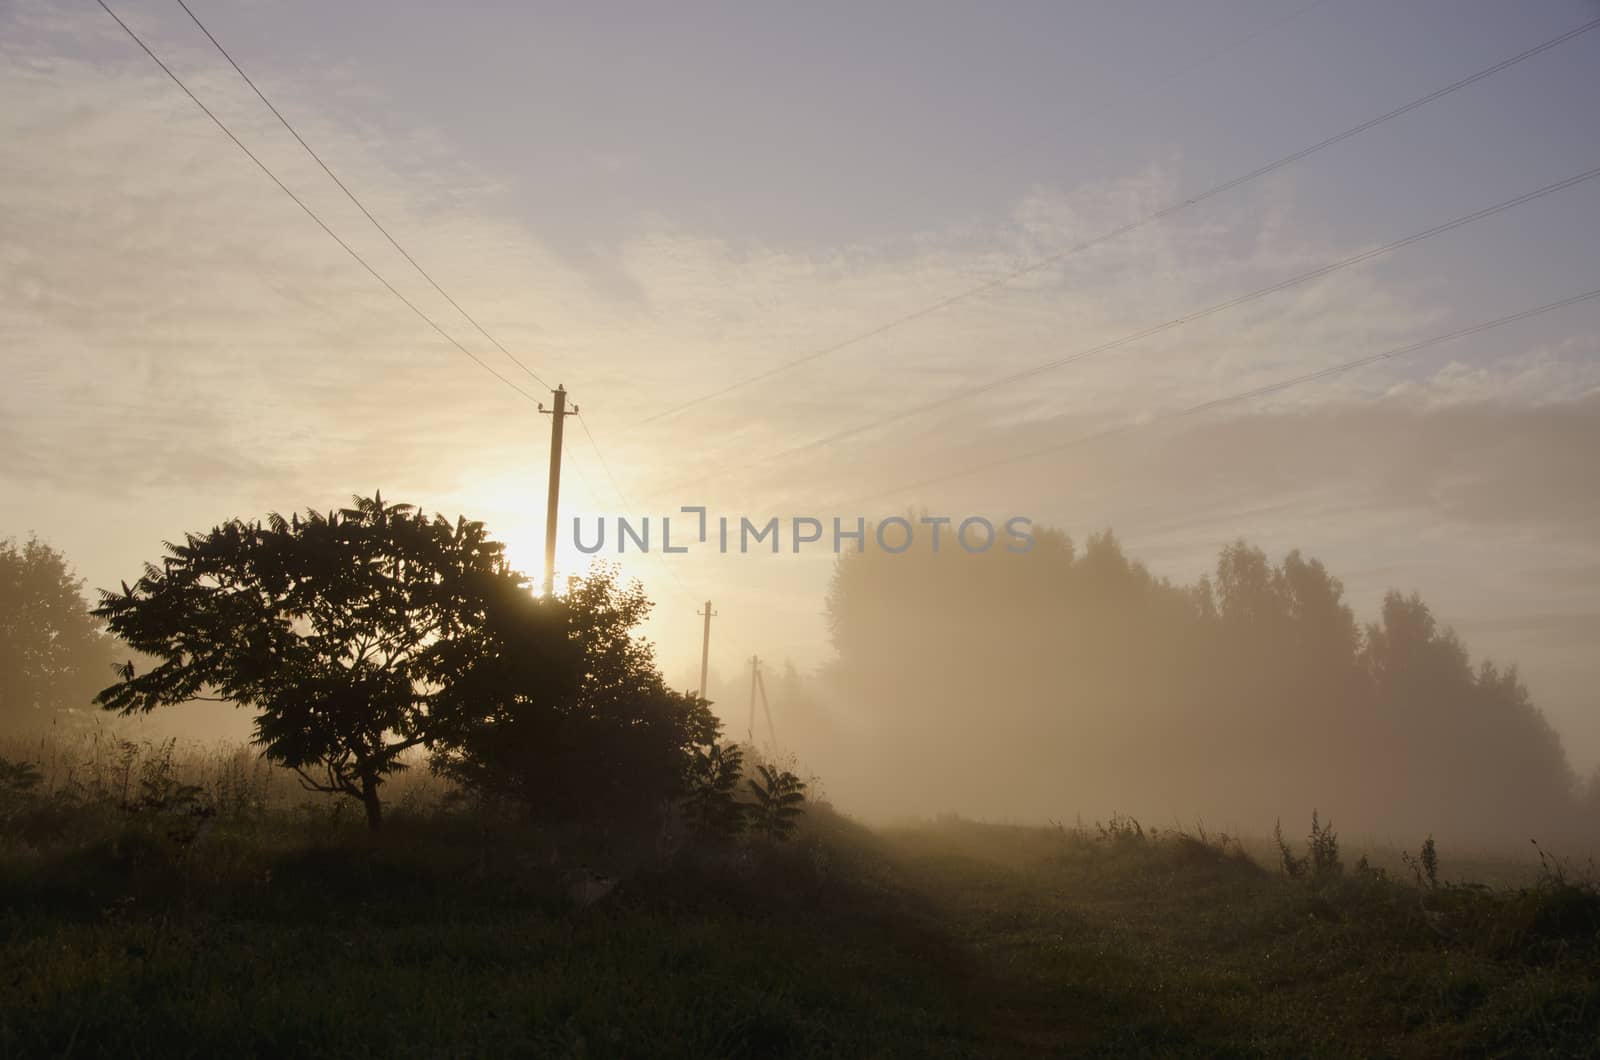 Sun rising through the fog on rural landscape with an electricity pole